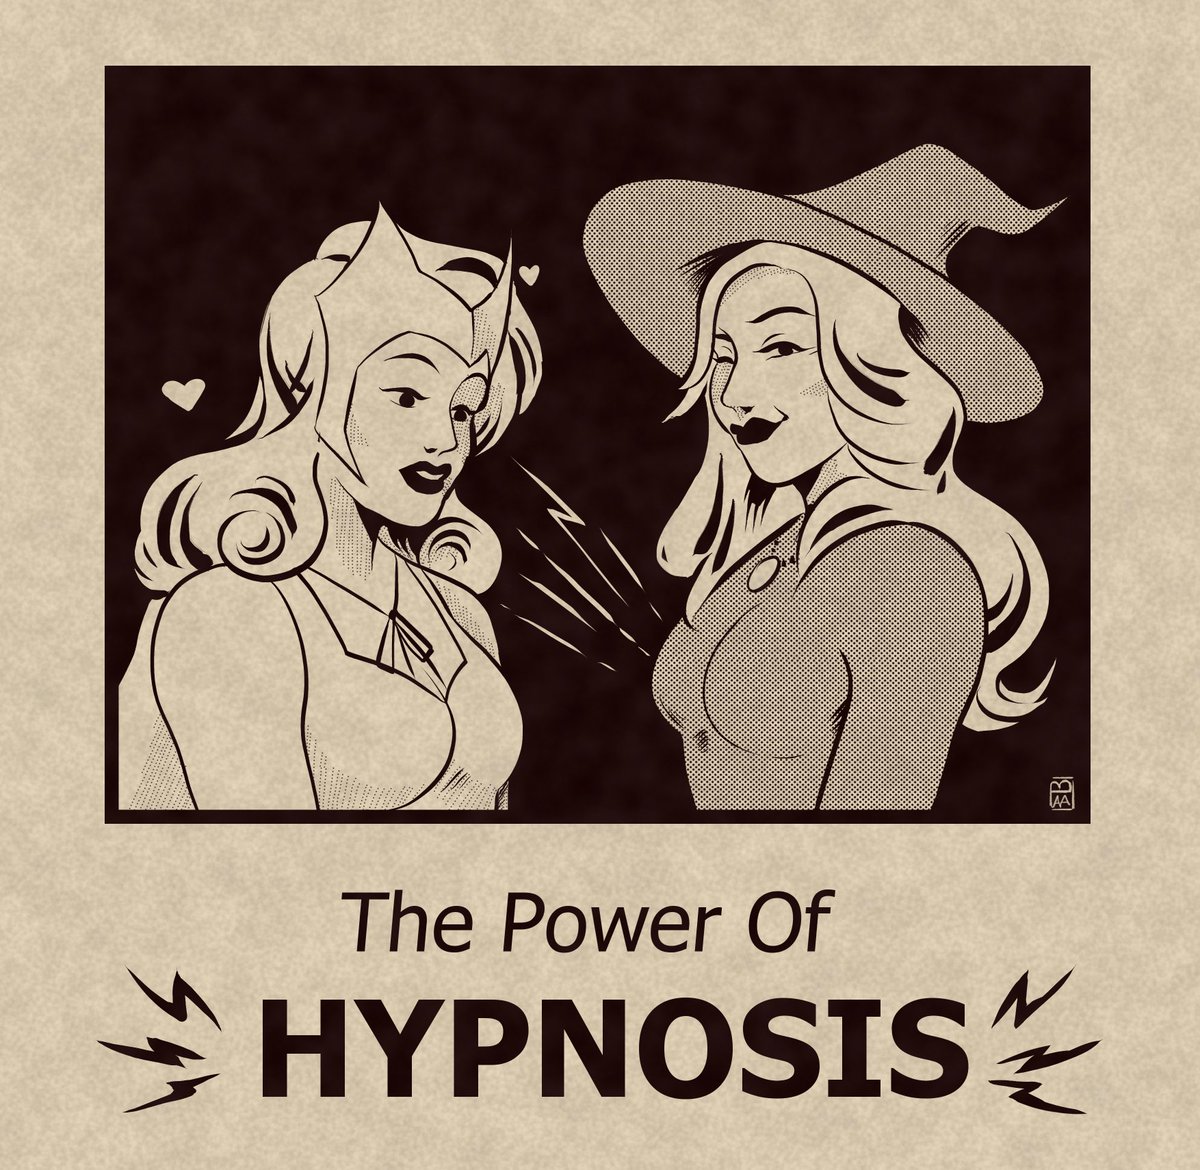 A WandaVision parody I drew of @jeniferrprince 's ' The power of hypnosis' Illustration! I felt it would give a understandable explanation for Wanda being oblivious to Agatha's schemes ?.
(original in the thread) 